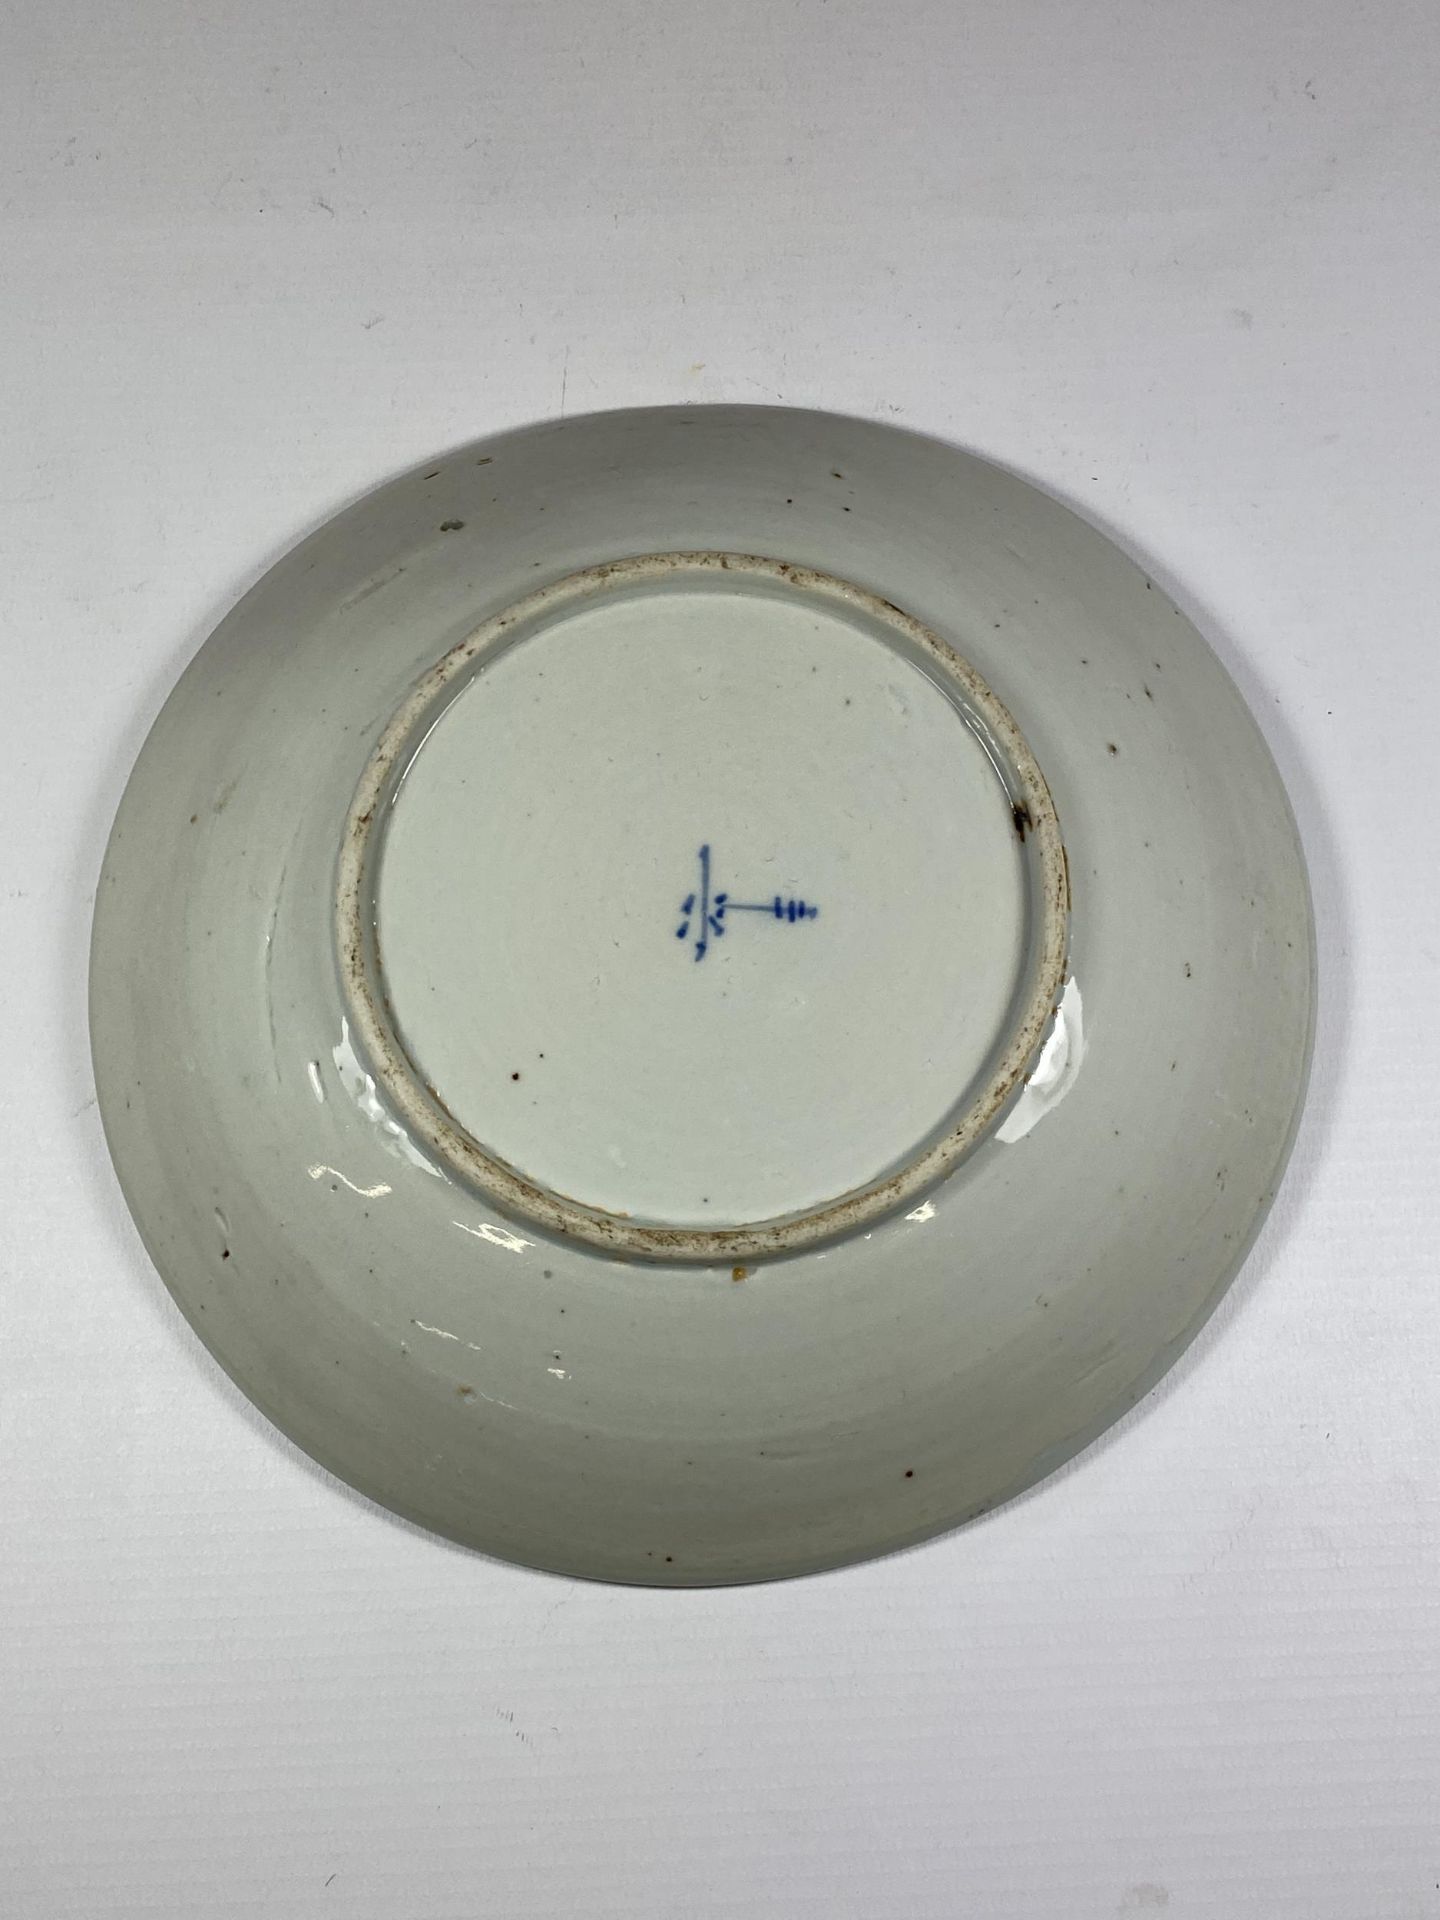 A LATE 19TH / EARLY 20TH CENTURY CHINESE PORCELAIN FISH DESIGN PLATE, MARKS TO BASE, DIAMETER 21.5CM - Image 3 of 4